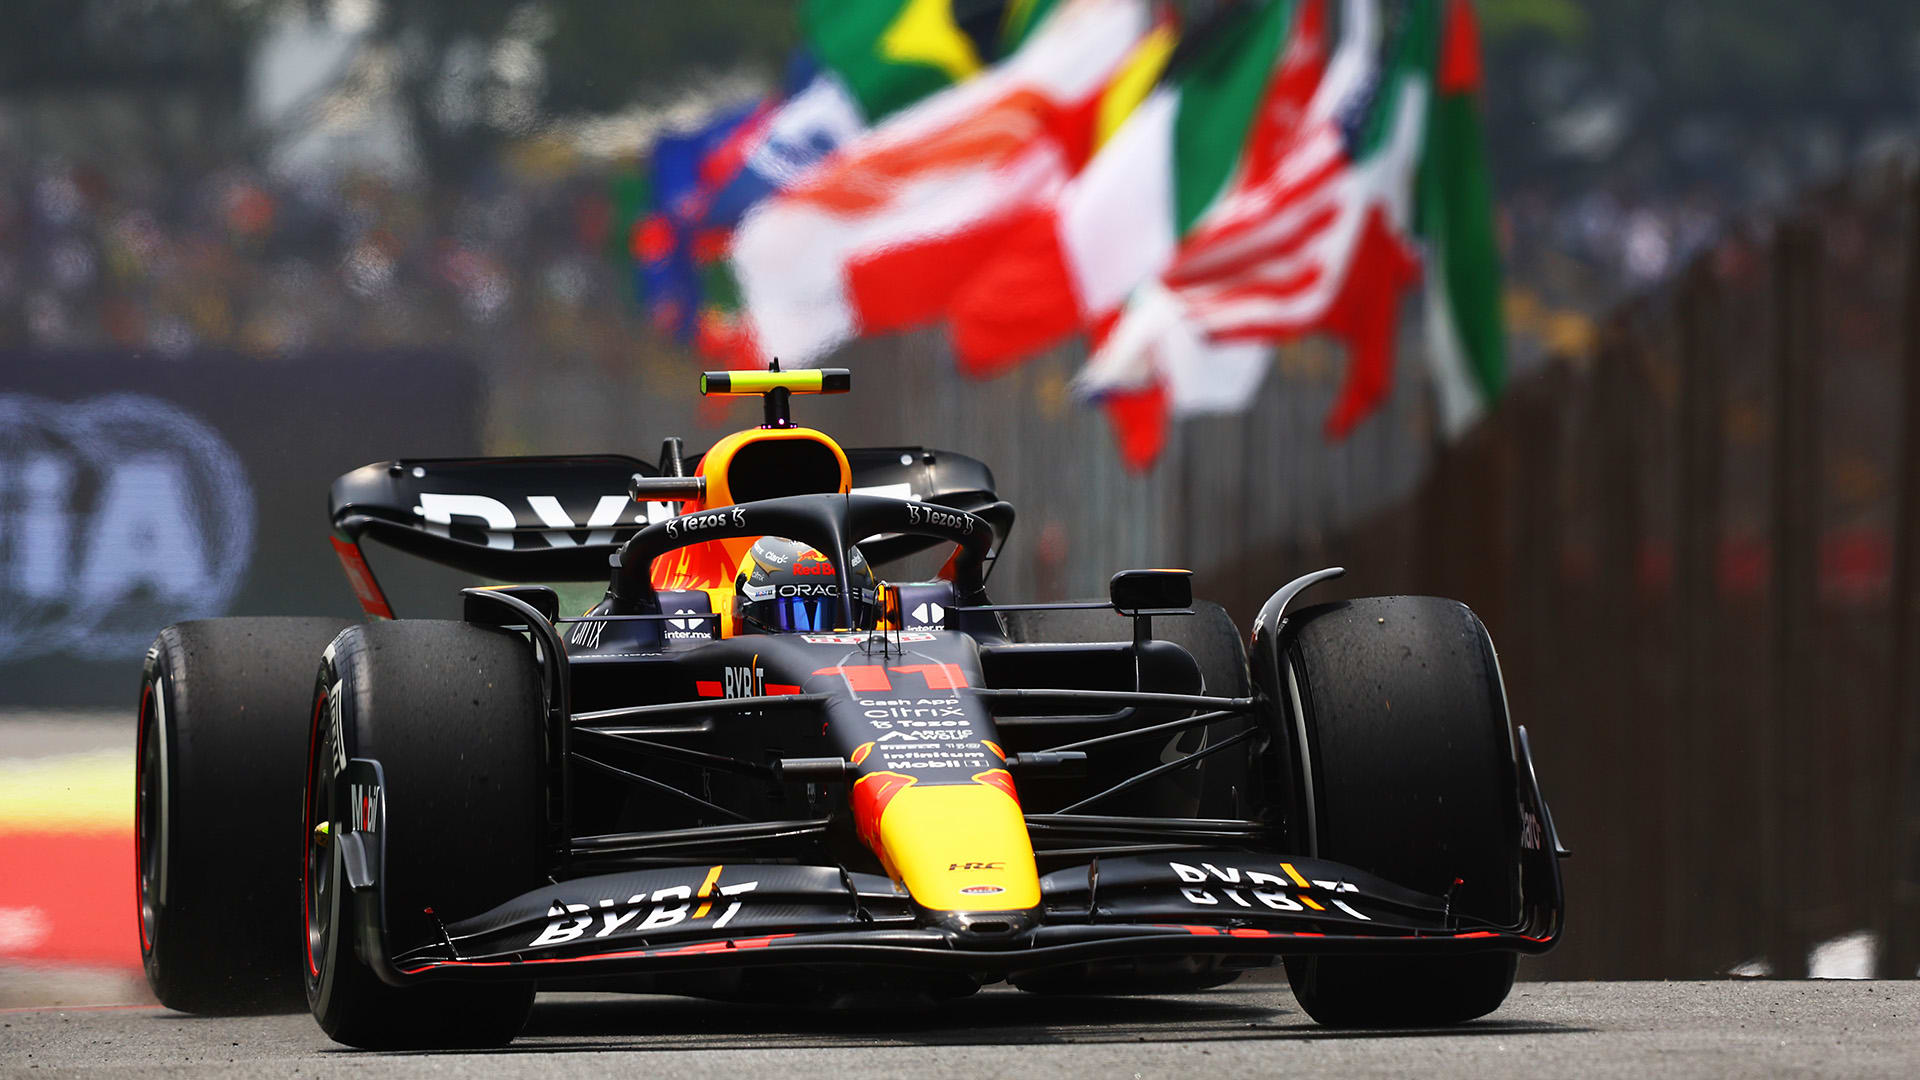 FP1 report and highlights from the 2022 Sao Paulo Grand Prix FP1 Perez edges out Leclerc and Verstappen in ultra-close first practice at Interlagos as qualifying nears Formula 1®